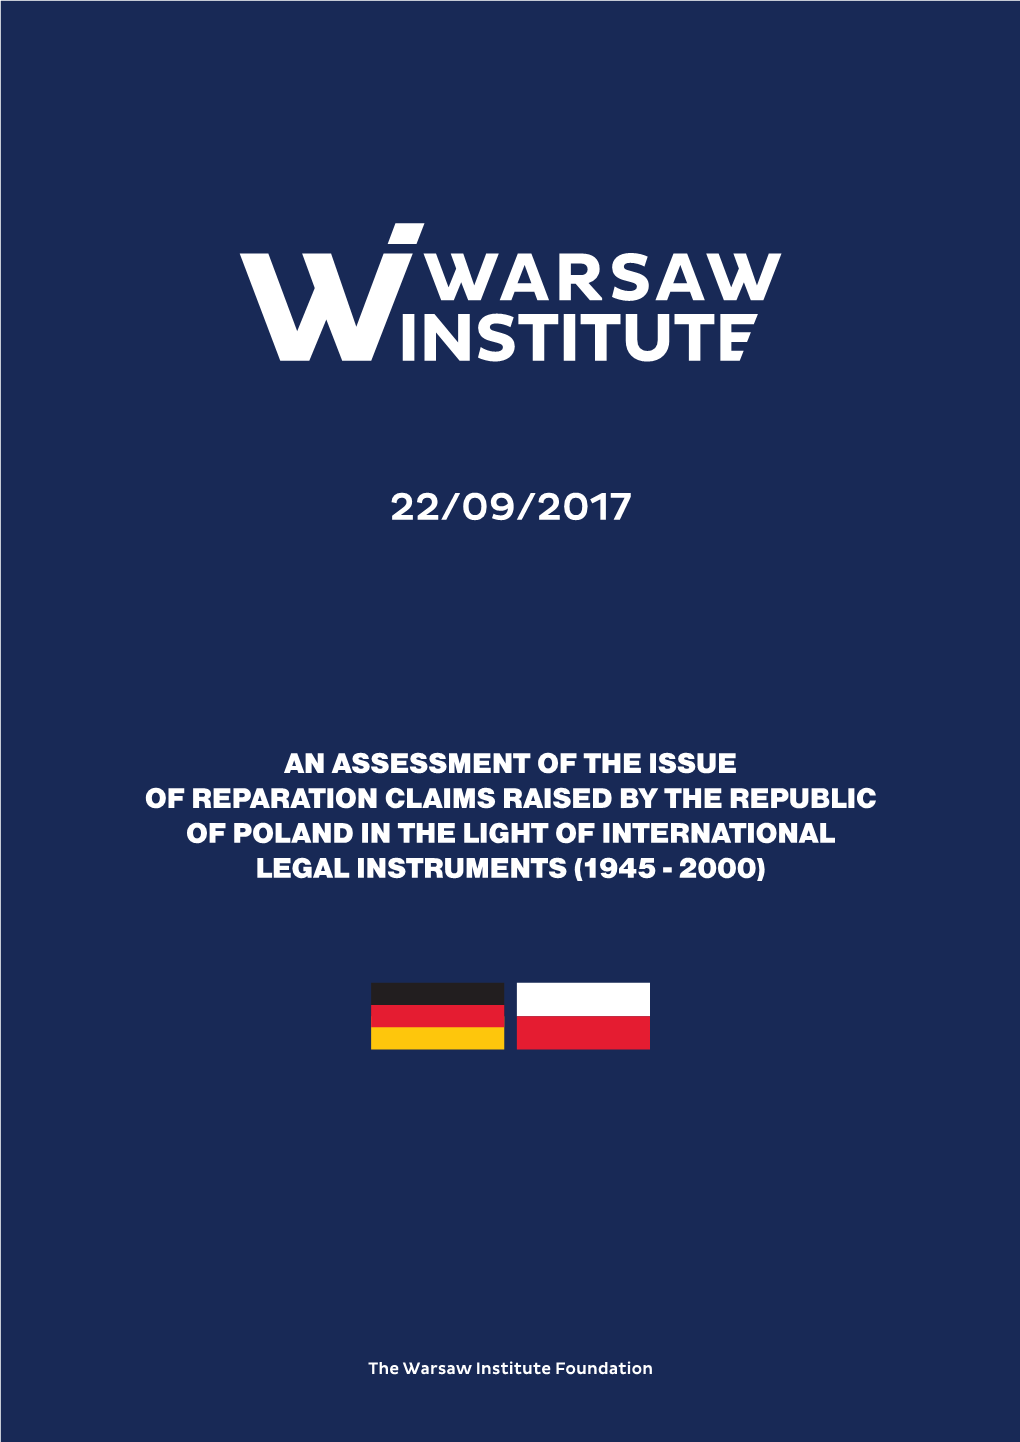 An Assessment of the Issue of Reparation Claims Raised by the Republic of Poland in the Light of International Legal Instruments (1945 - 2000)